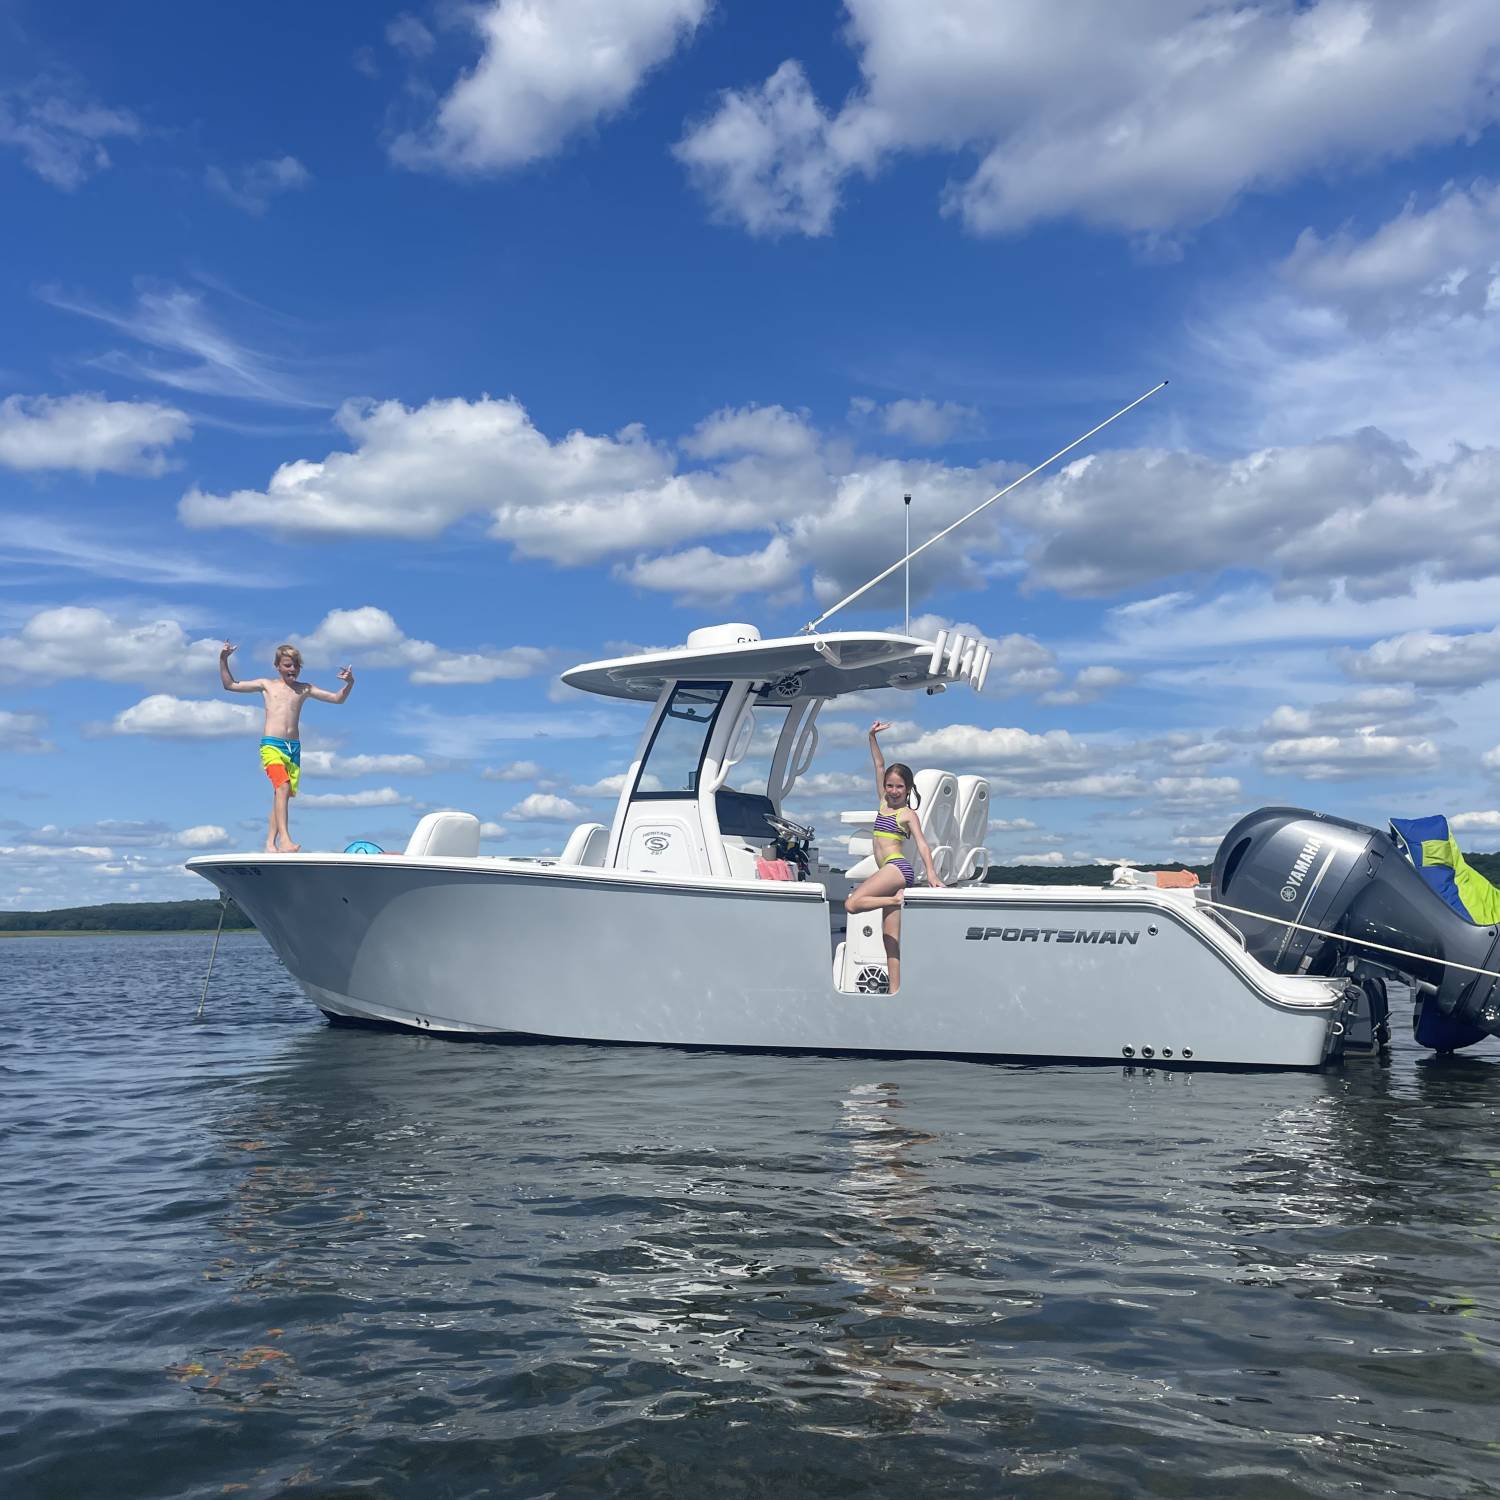 Title: Beast mode - On board their Sportsman Heritage 261 Center Console - Location: Pine Islands Groton CT. Participating in the Photo Contest #SportsmanAugust2023